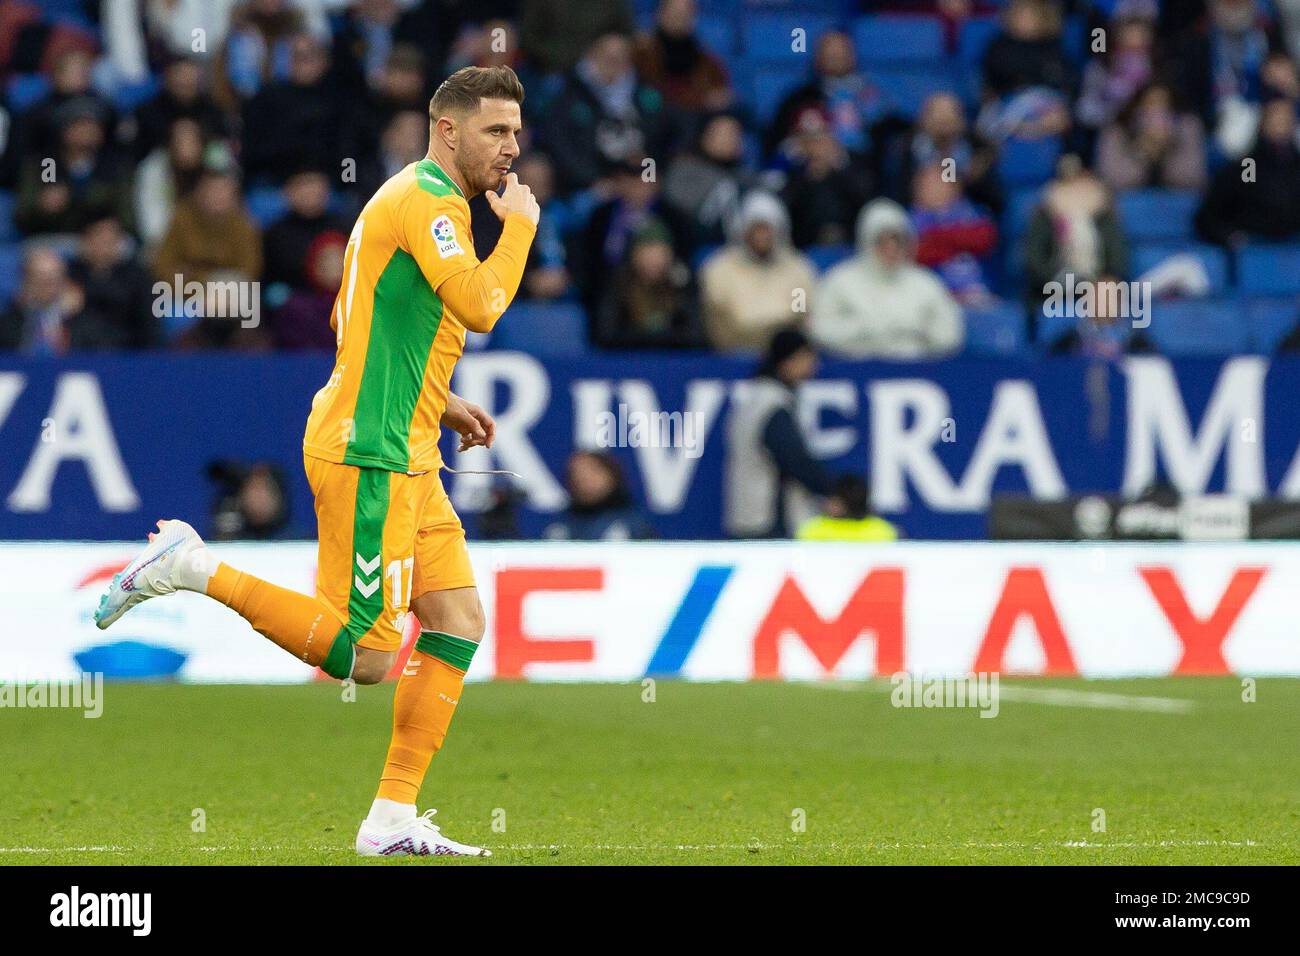 Joaquin of Real Betis Balompie during the Liga match between RCD Espanyol and Real Betis at RCDE Stadium in Cornella, Spain. Stock Photo